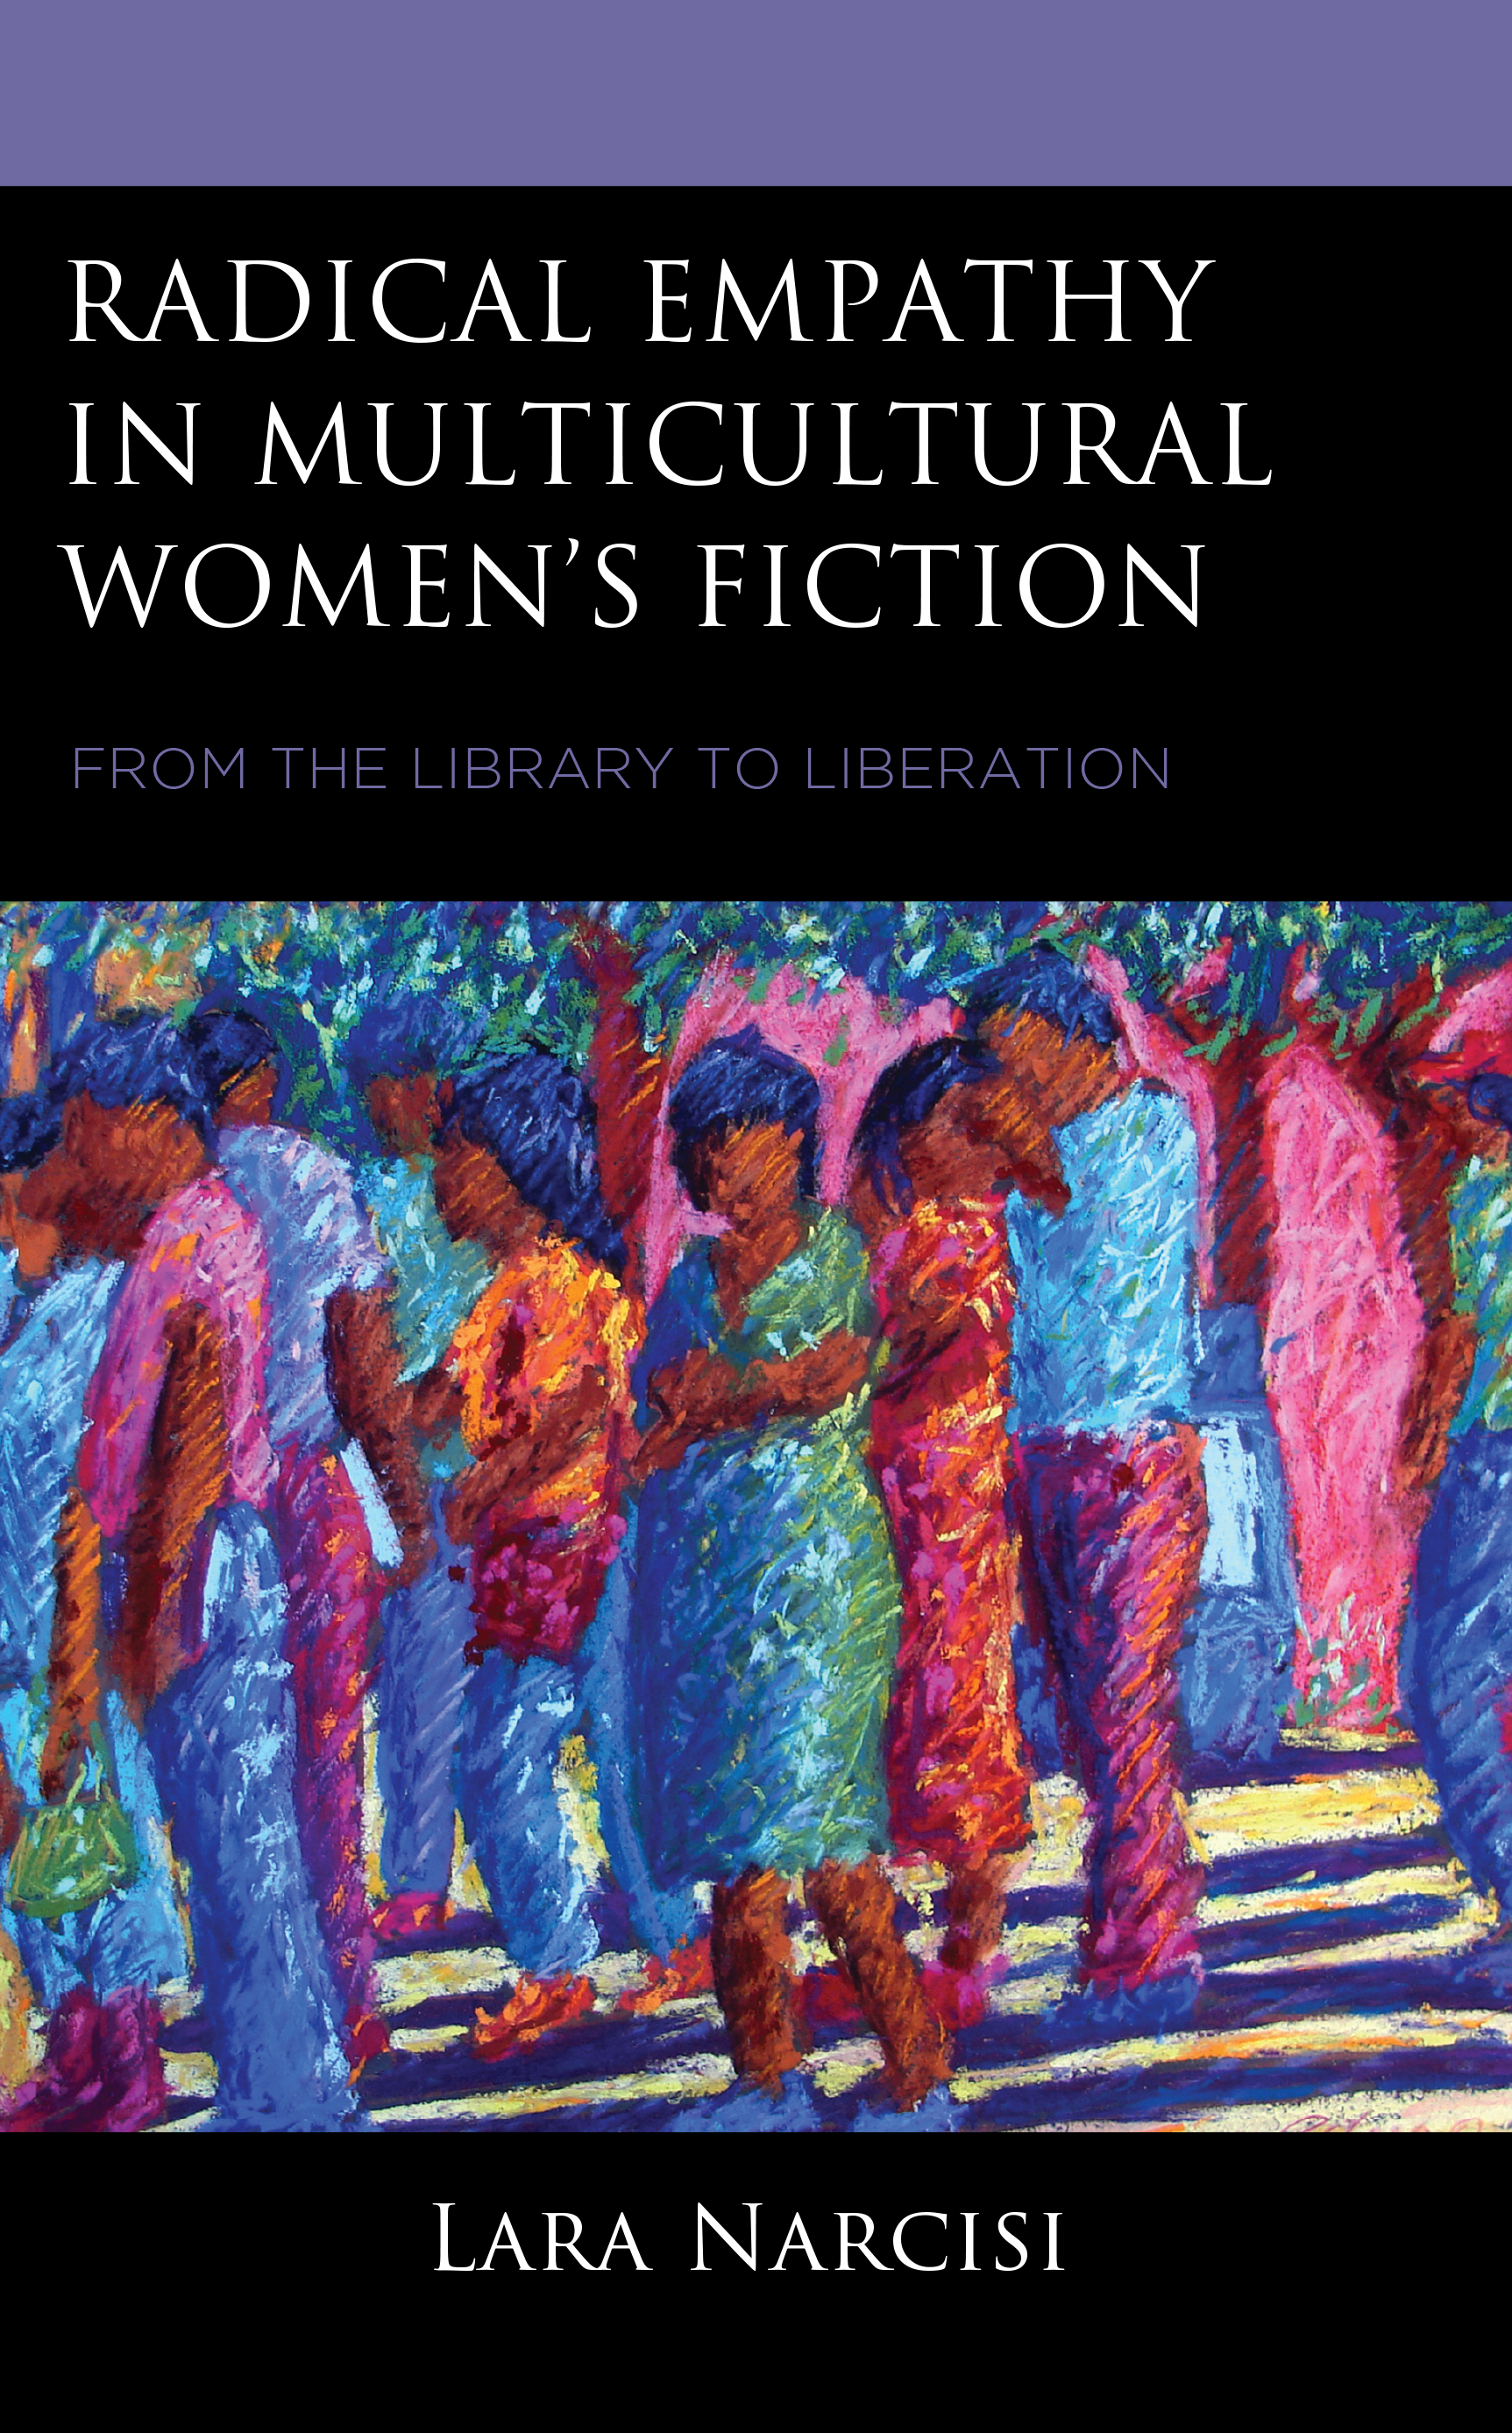 Radical Empathy in Multicultural Women’s Fiction: From the Library to Liberation